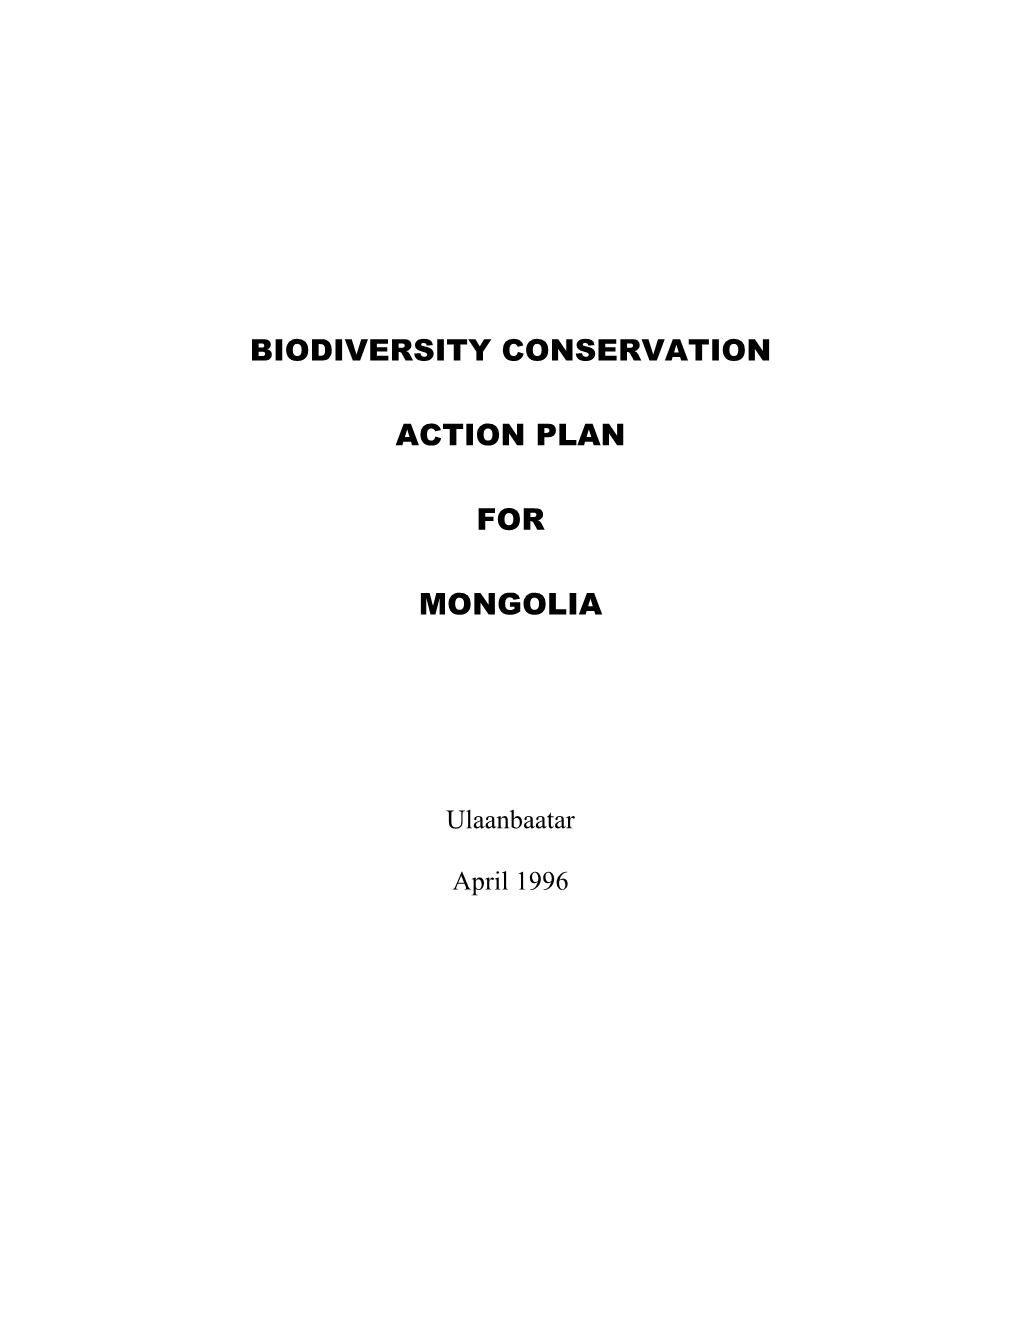 Biodiversity Conservation Action Plan for Mongolia